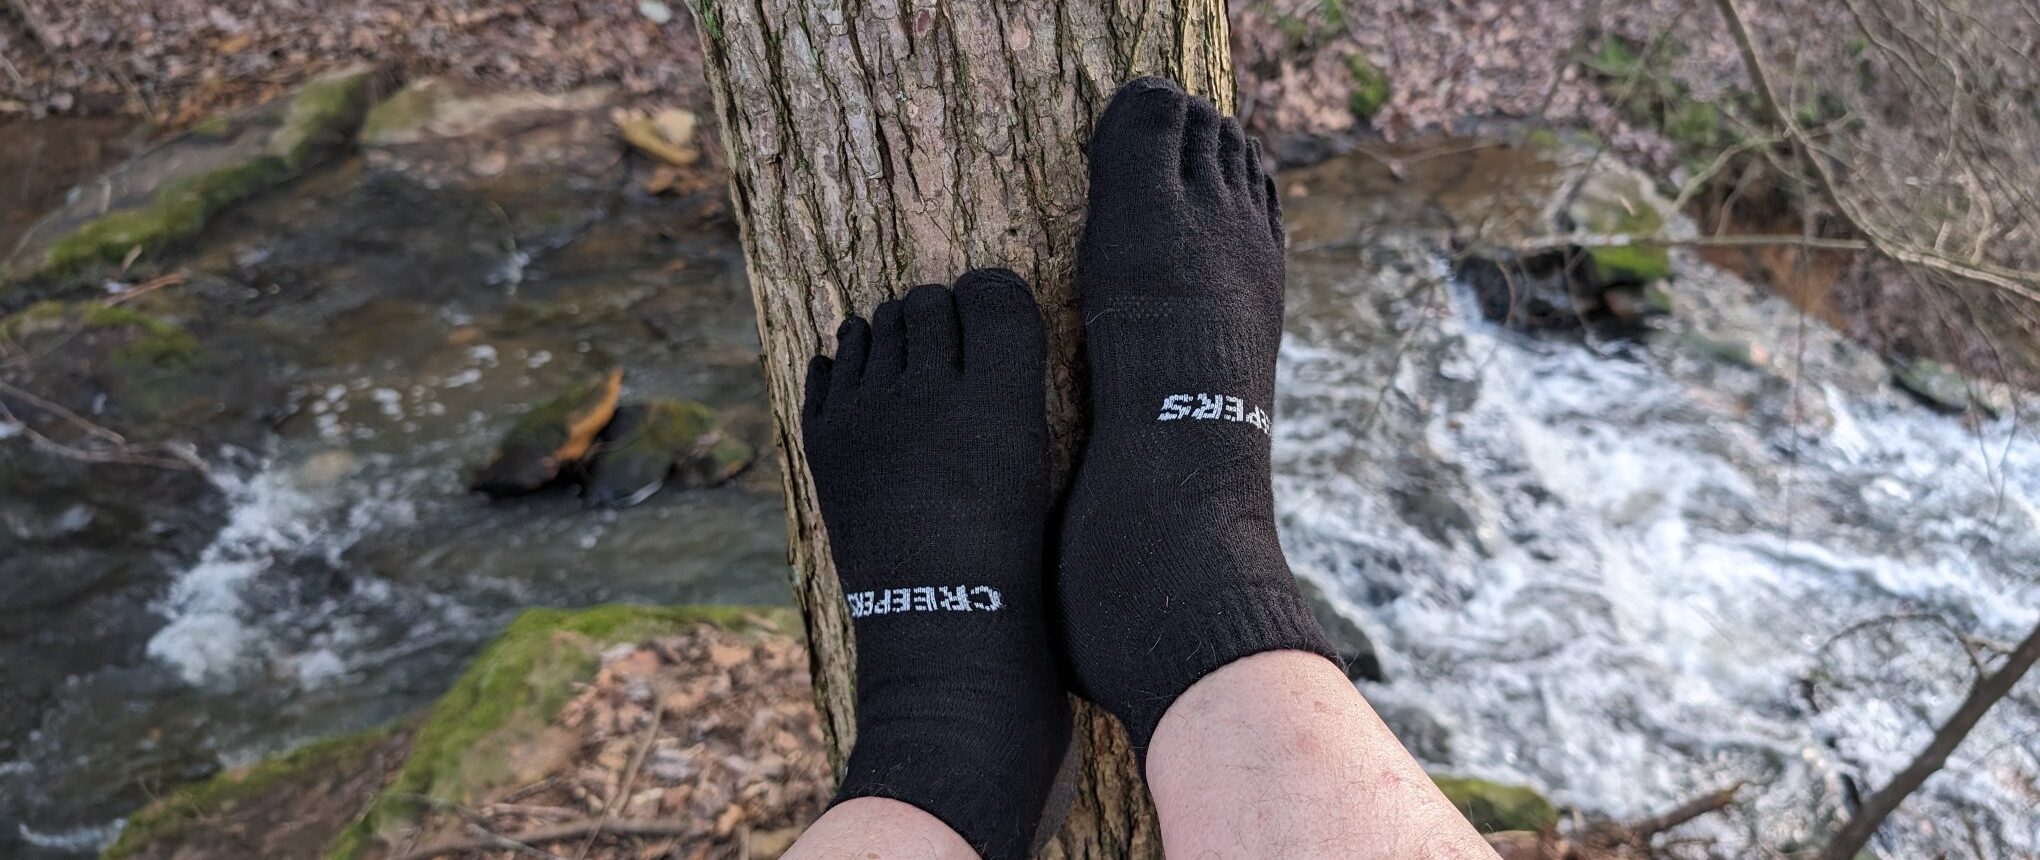 Creepers Merino wool toe socks on a person with feet propped against a tree.